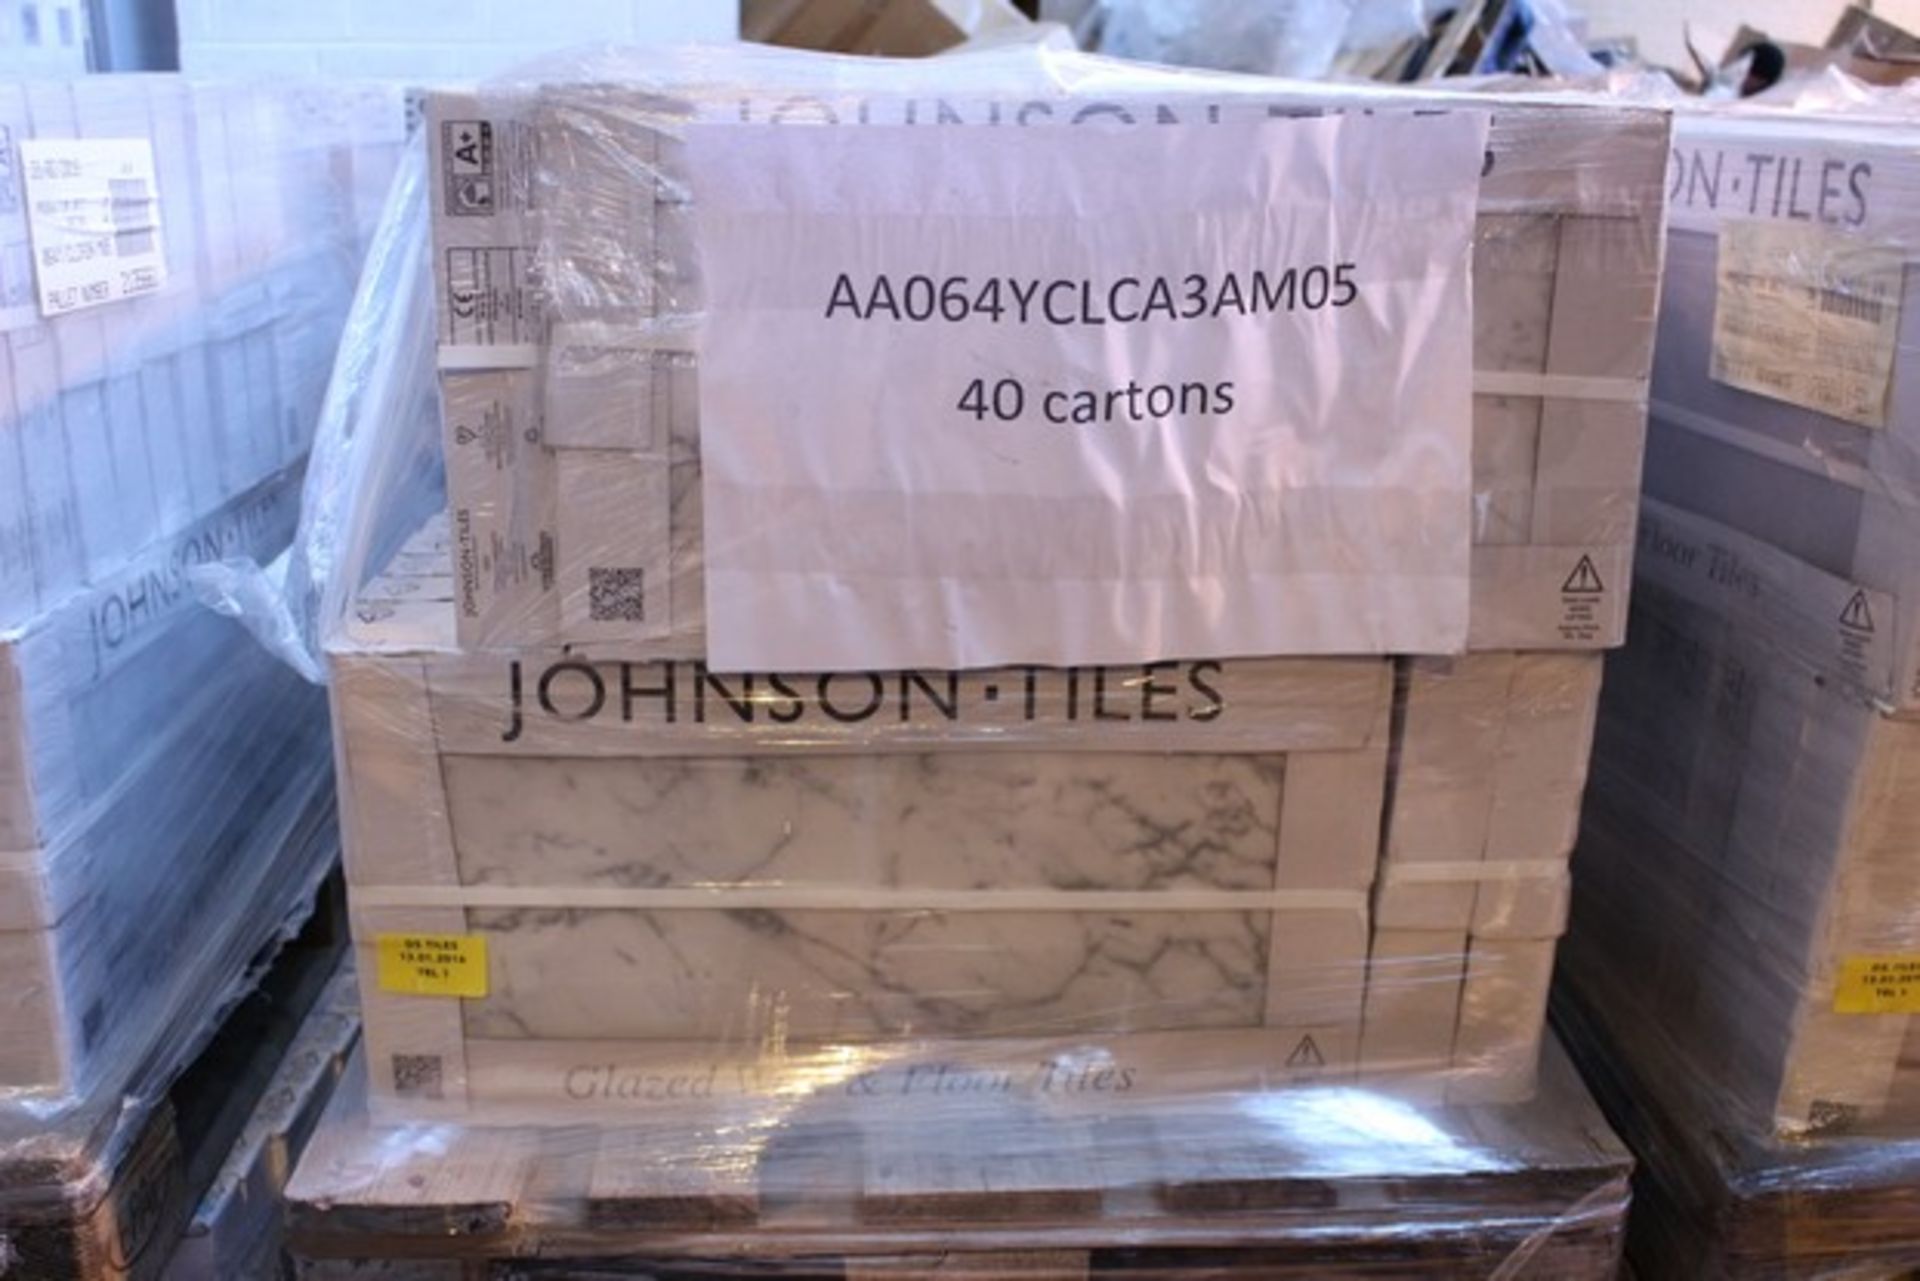 ONE PALLET TO CONTAIN 40X BOXES OF BRAND NEW CLCA3AM05 600X300 FLOOR AND WALL TILES RRP COMBINED £